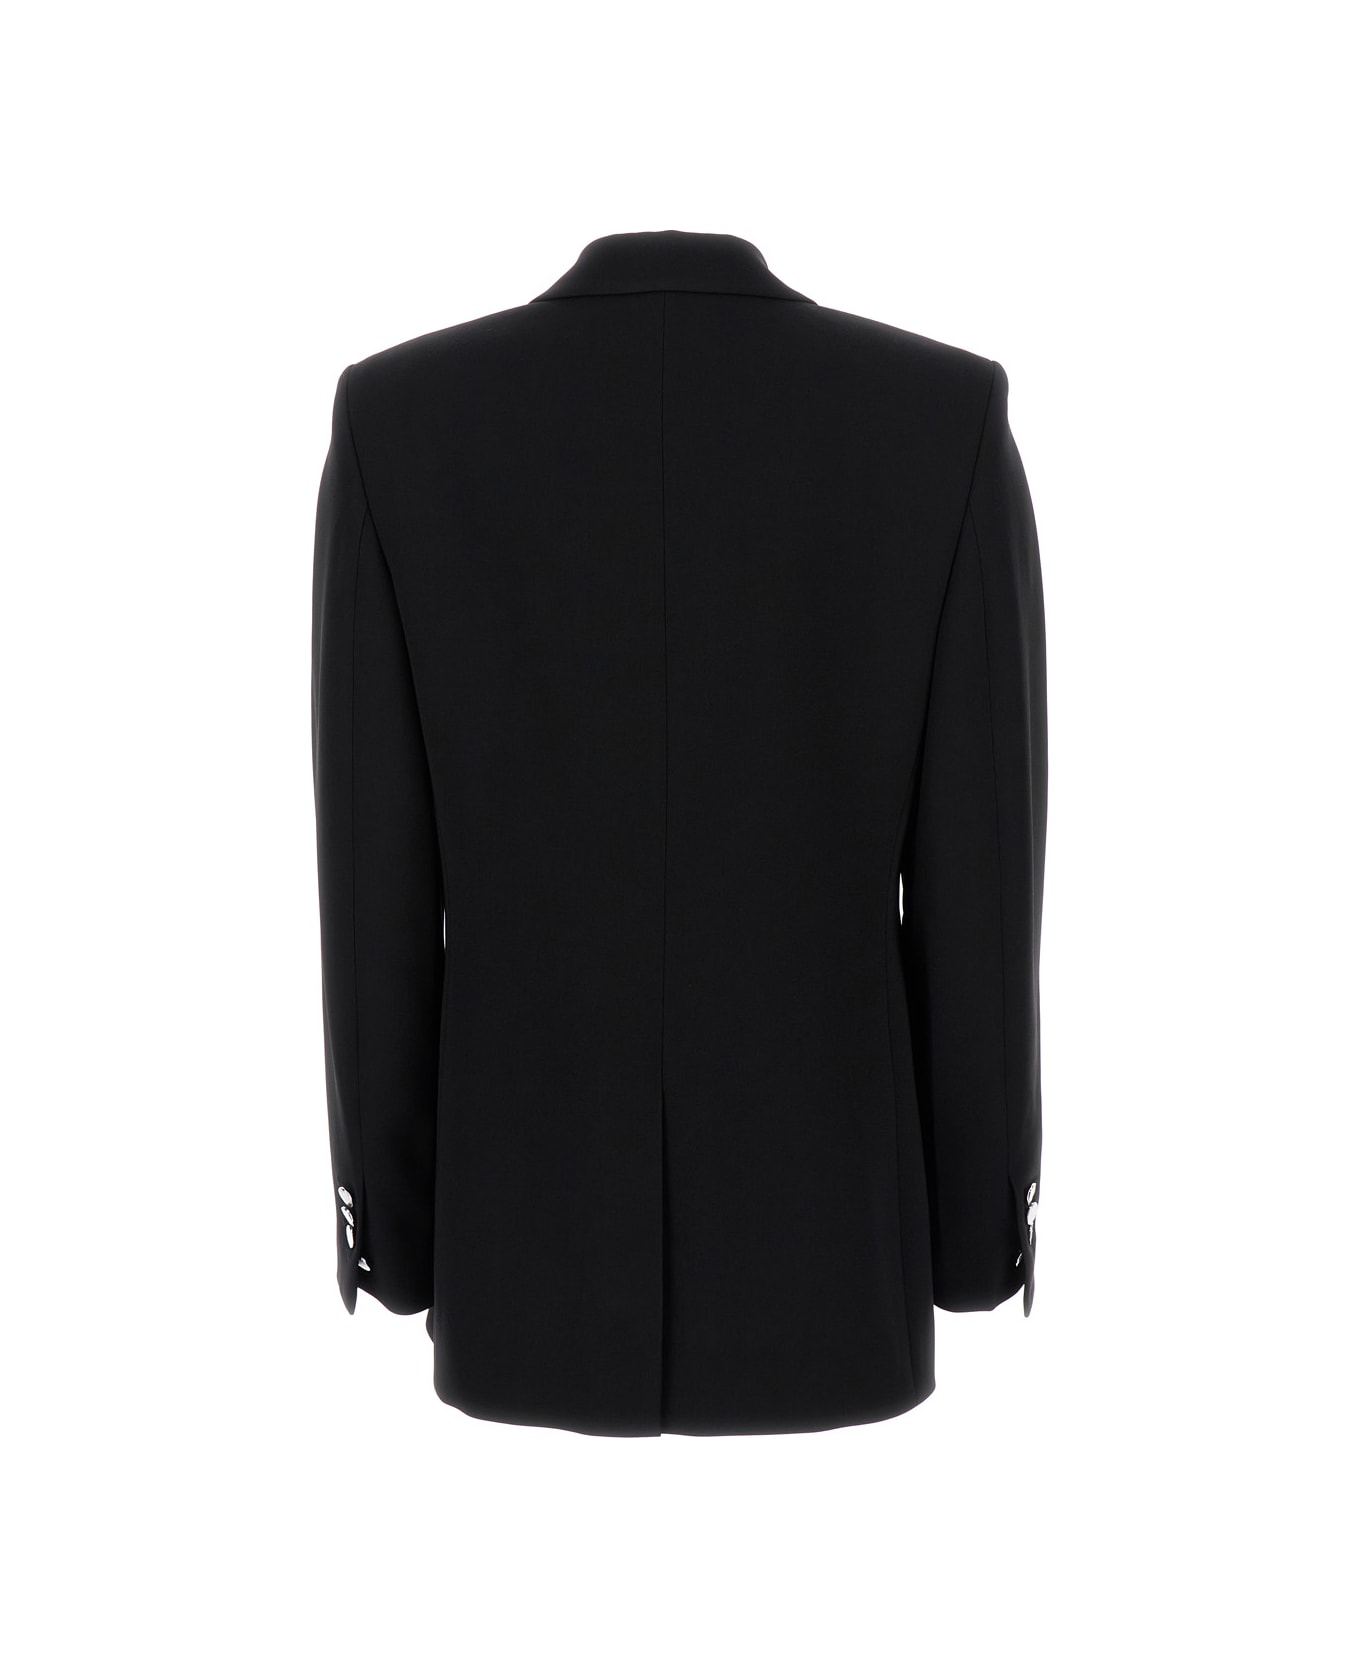 Theory Black Single-breasted Blazer With Classic Lapels In Technical Fabric Woman - Black